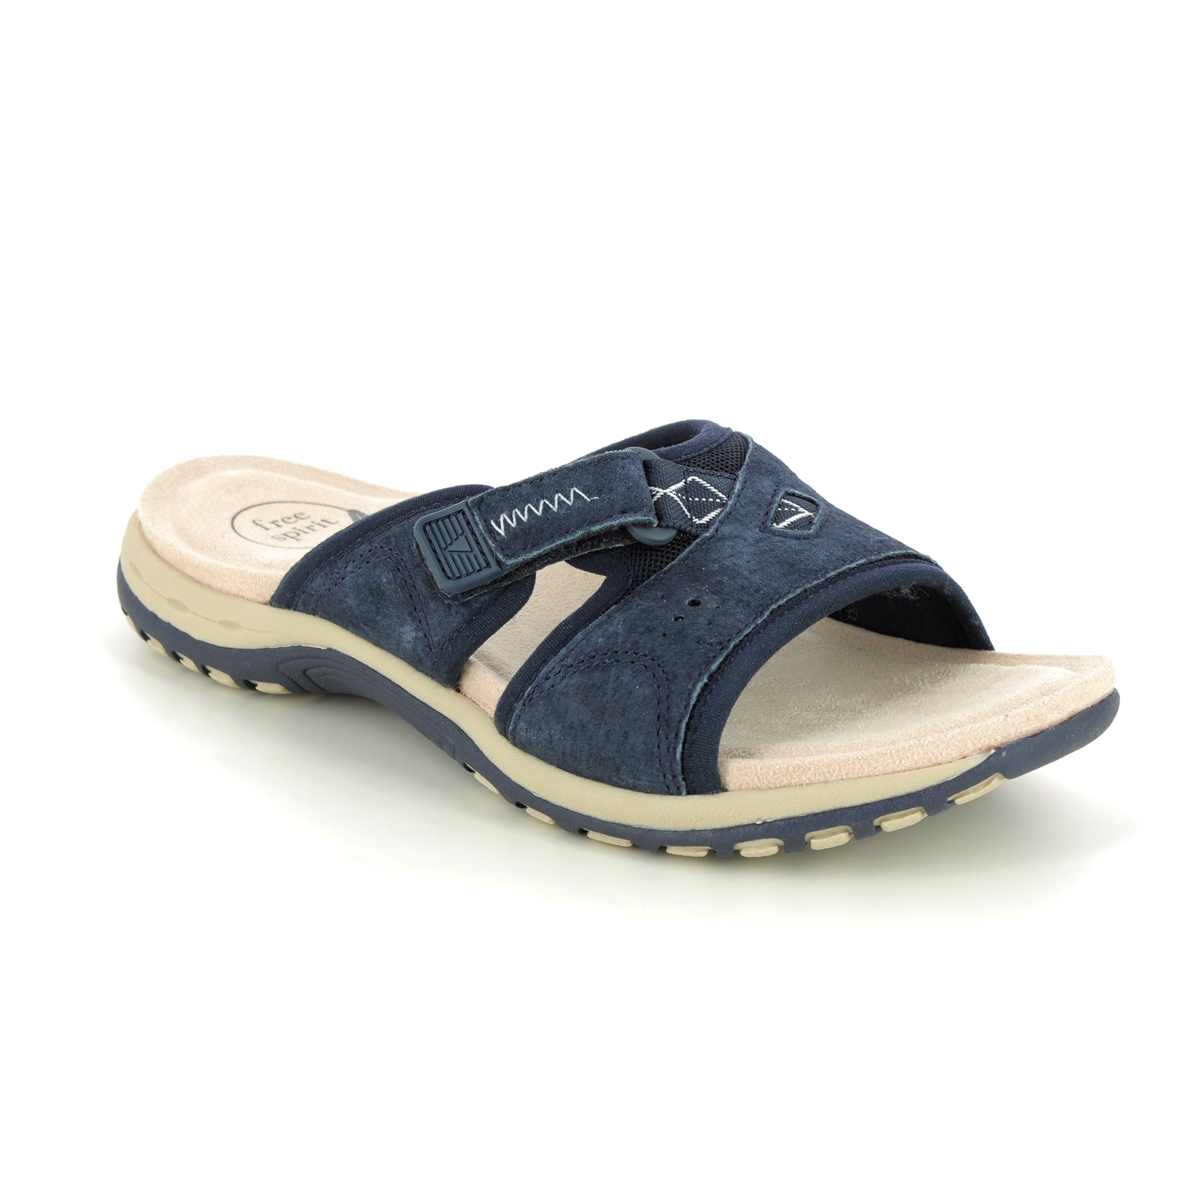 Earth Spirit Wickford Navy Suede Womens Slide Sandals 40517- In Size 5 In Plain Navy Suede